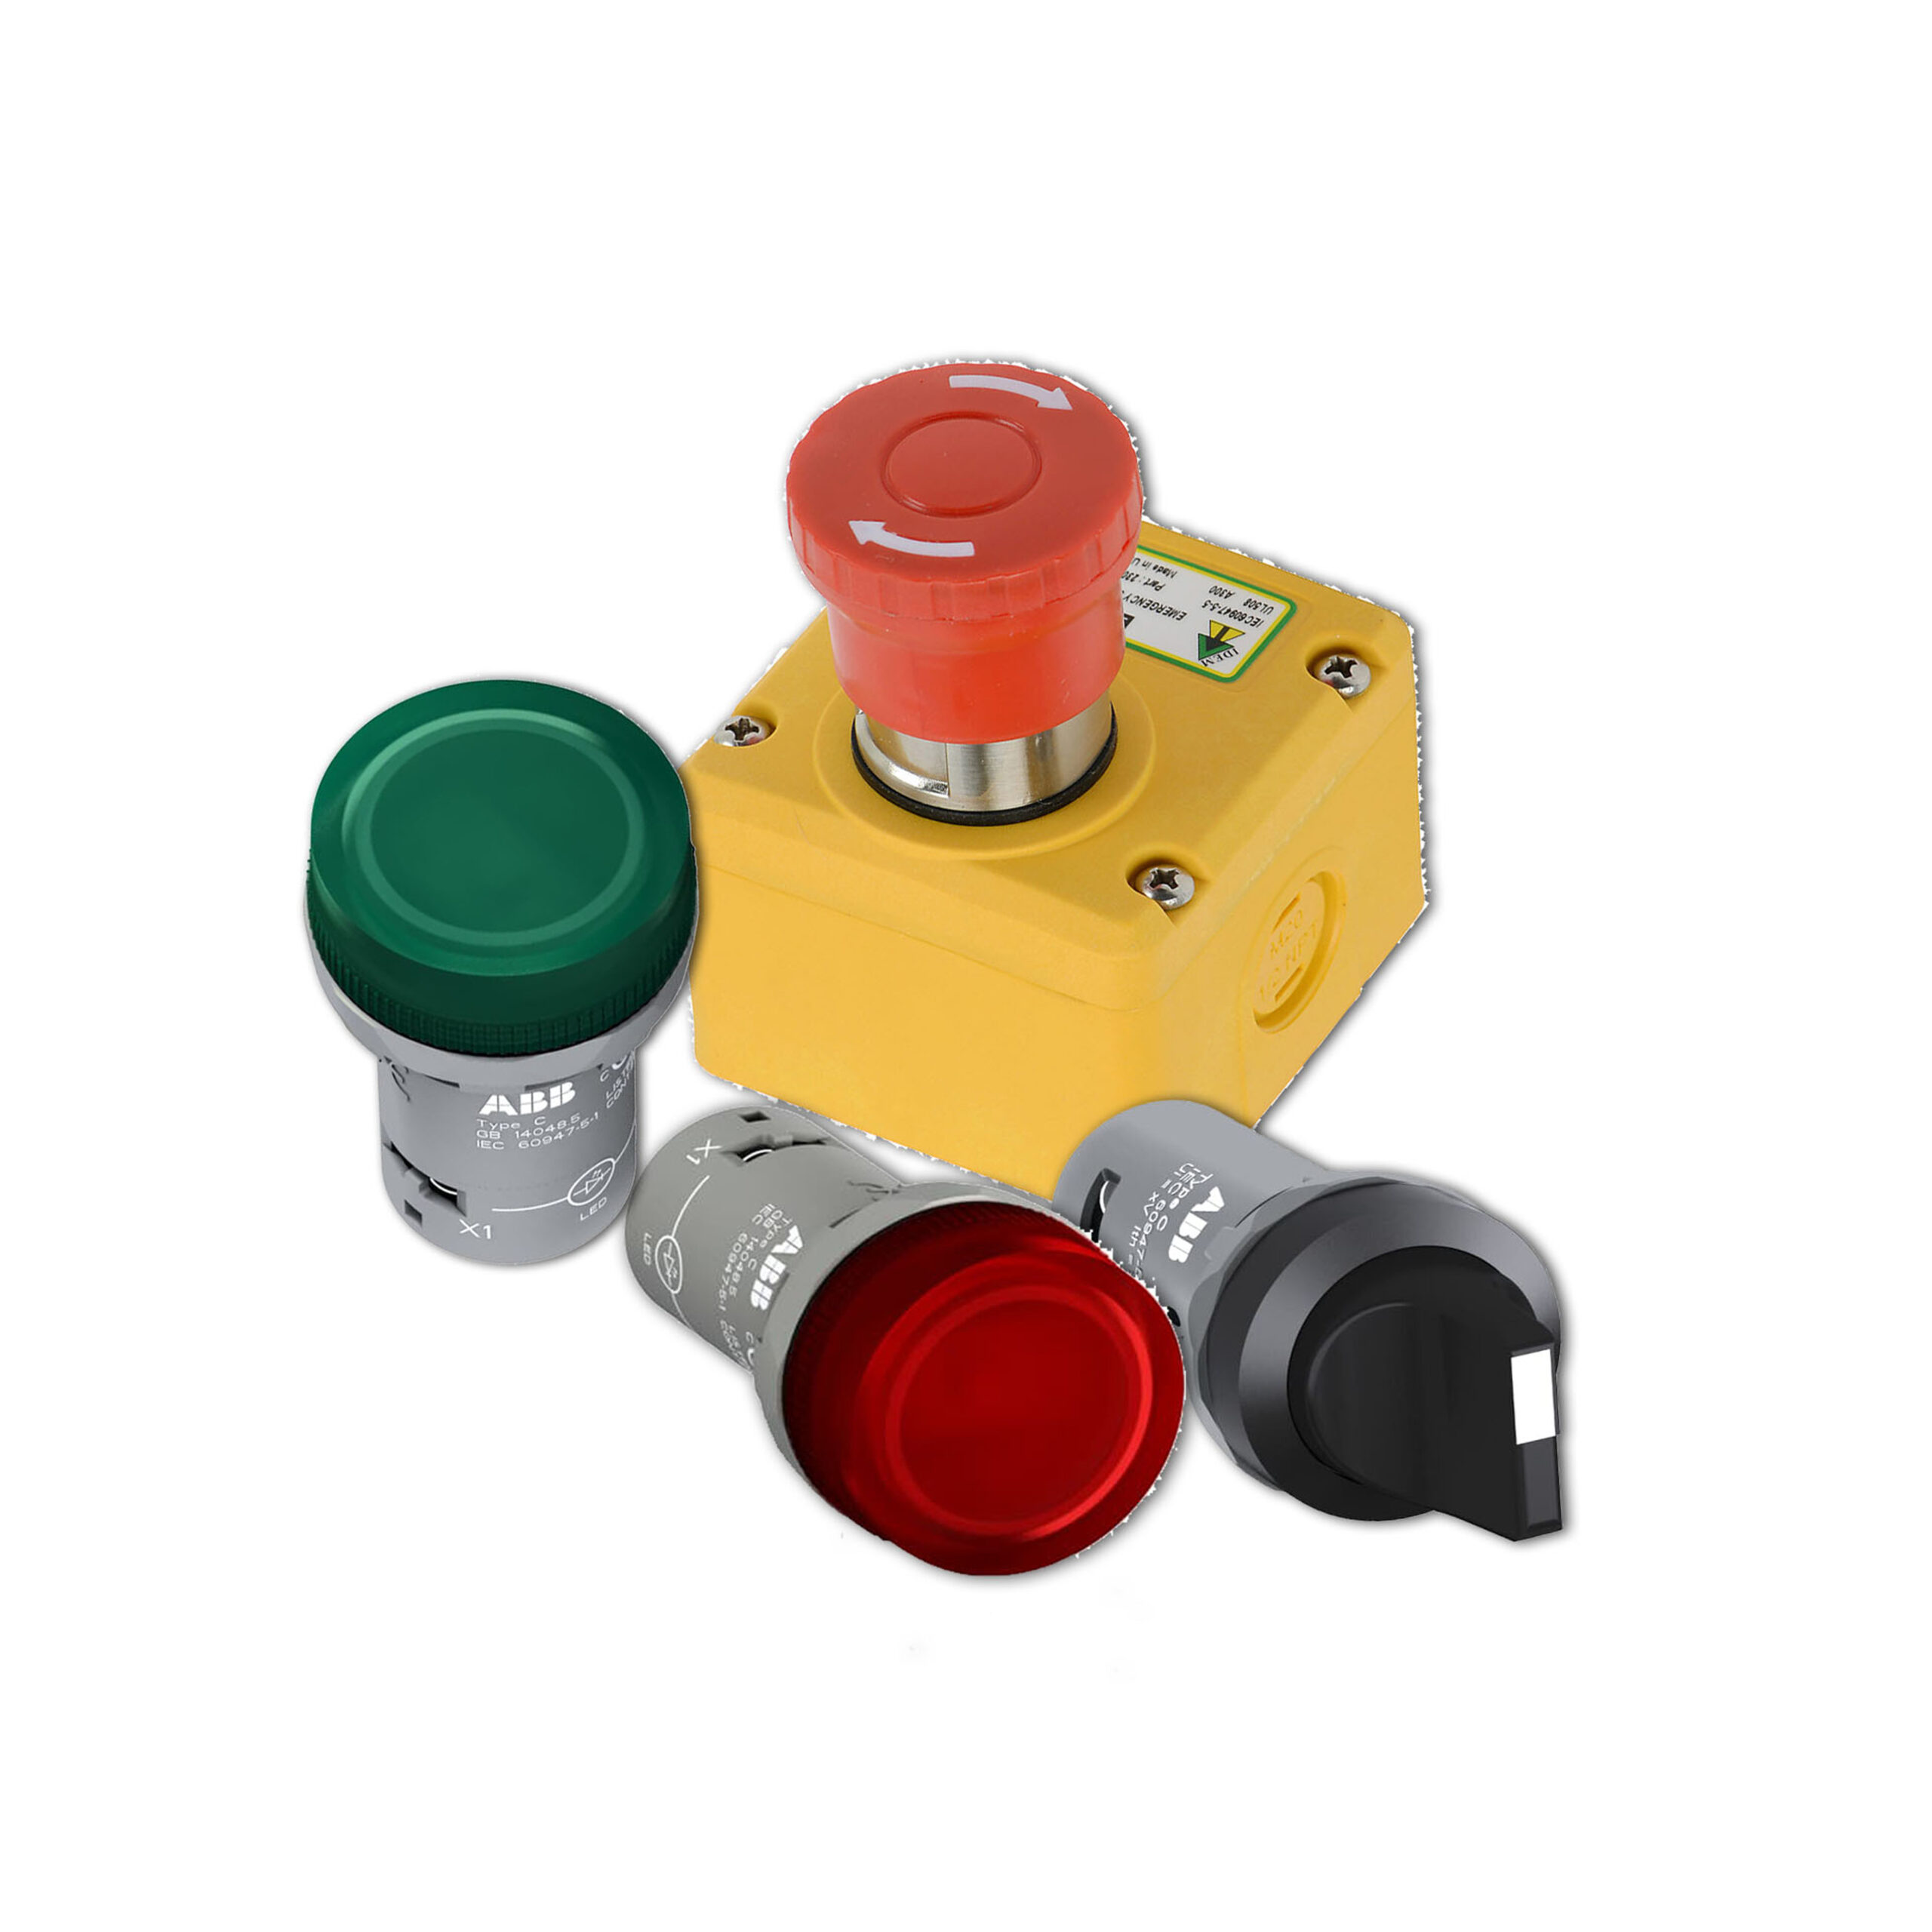 Emergency Stop Buttons, Switches and Indicator lights